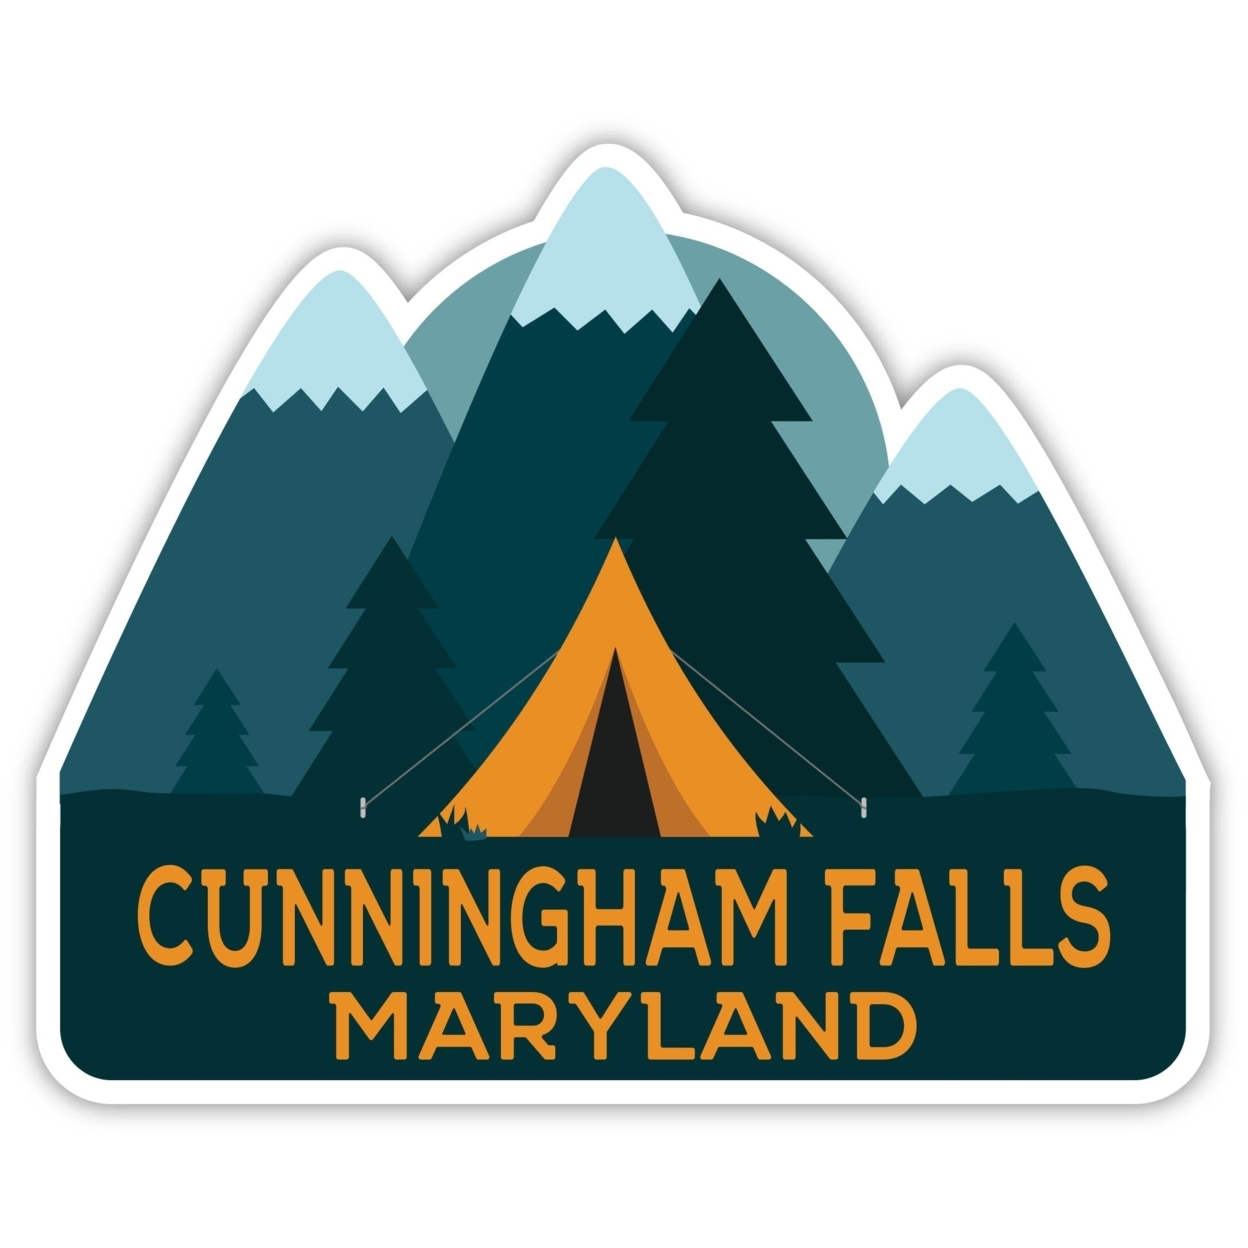 Cunningham Falls Maryland Souvenir Decorative Stickers (Choose Theme And Size) - 4-Pack, 2-Inch, Tent